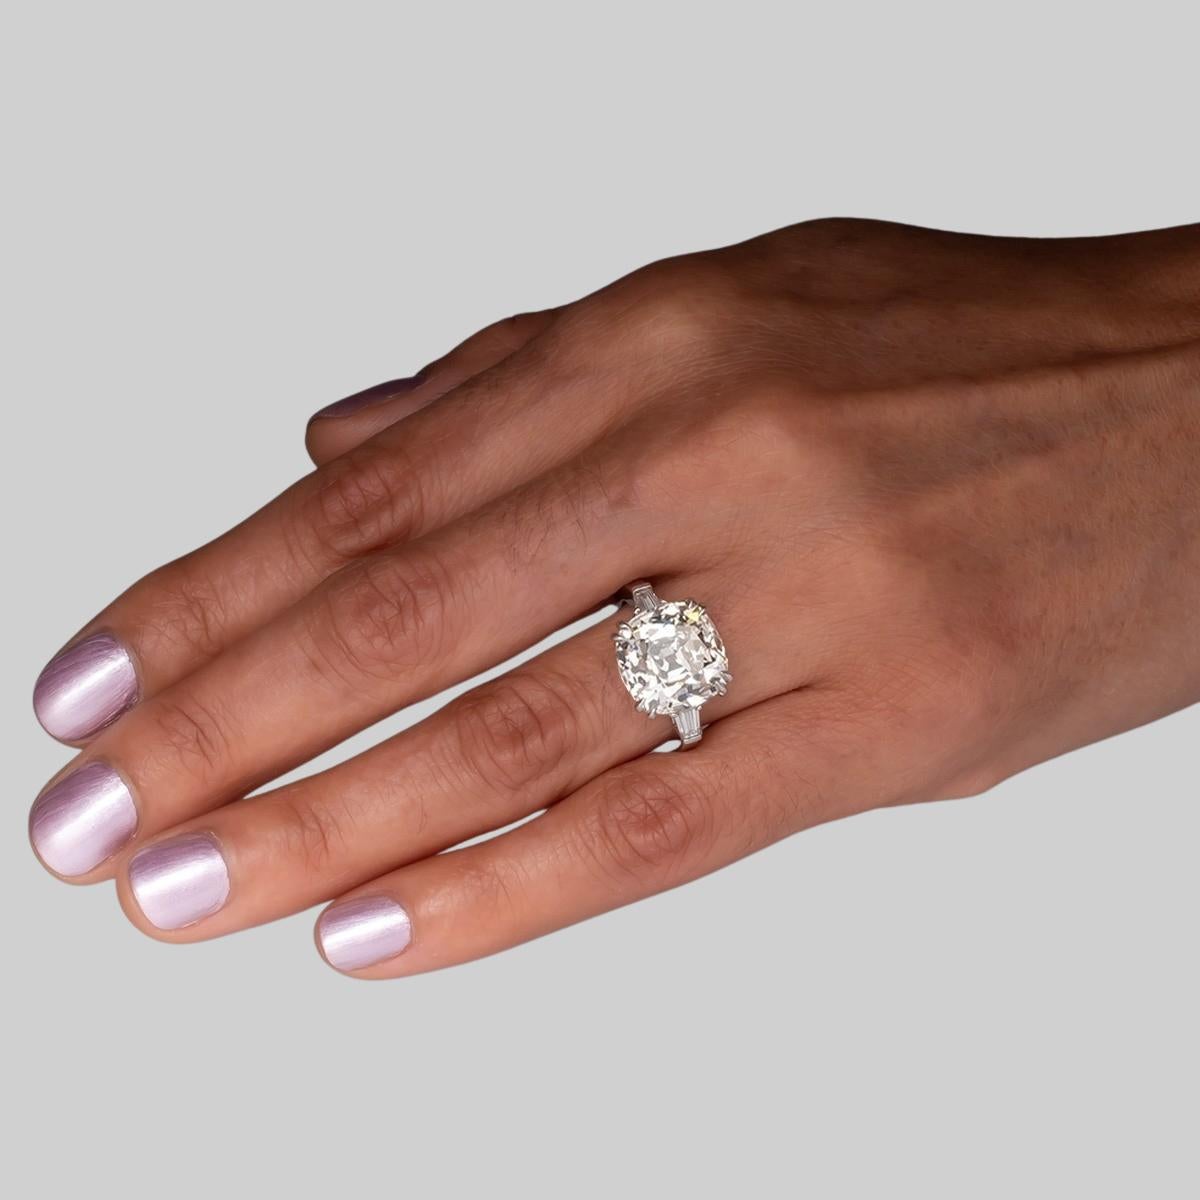 Taille vieille mine GIA Certified 3 Carat Old Mine Cut Diamond Solitaire Ring D FLAWLESS en vente